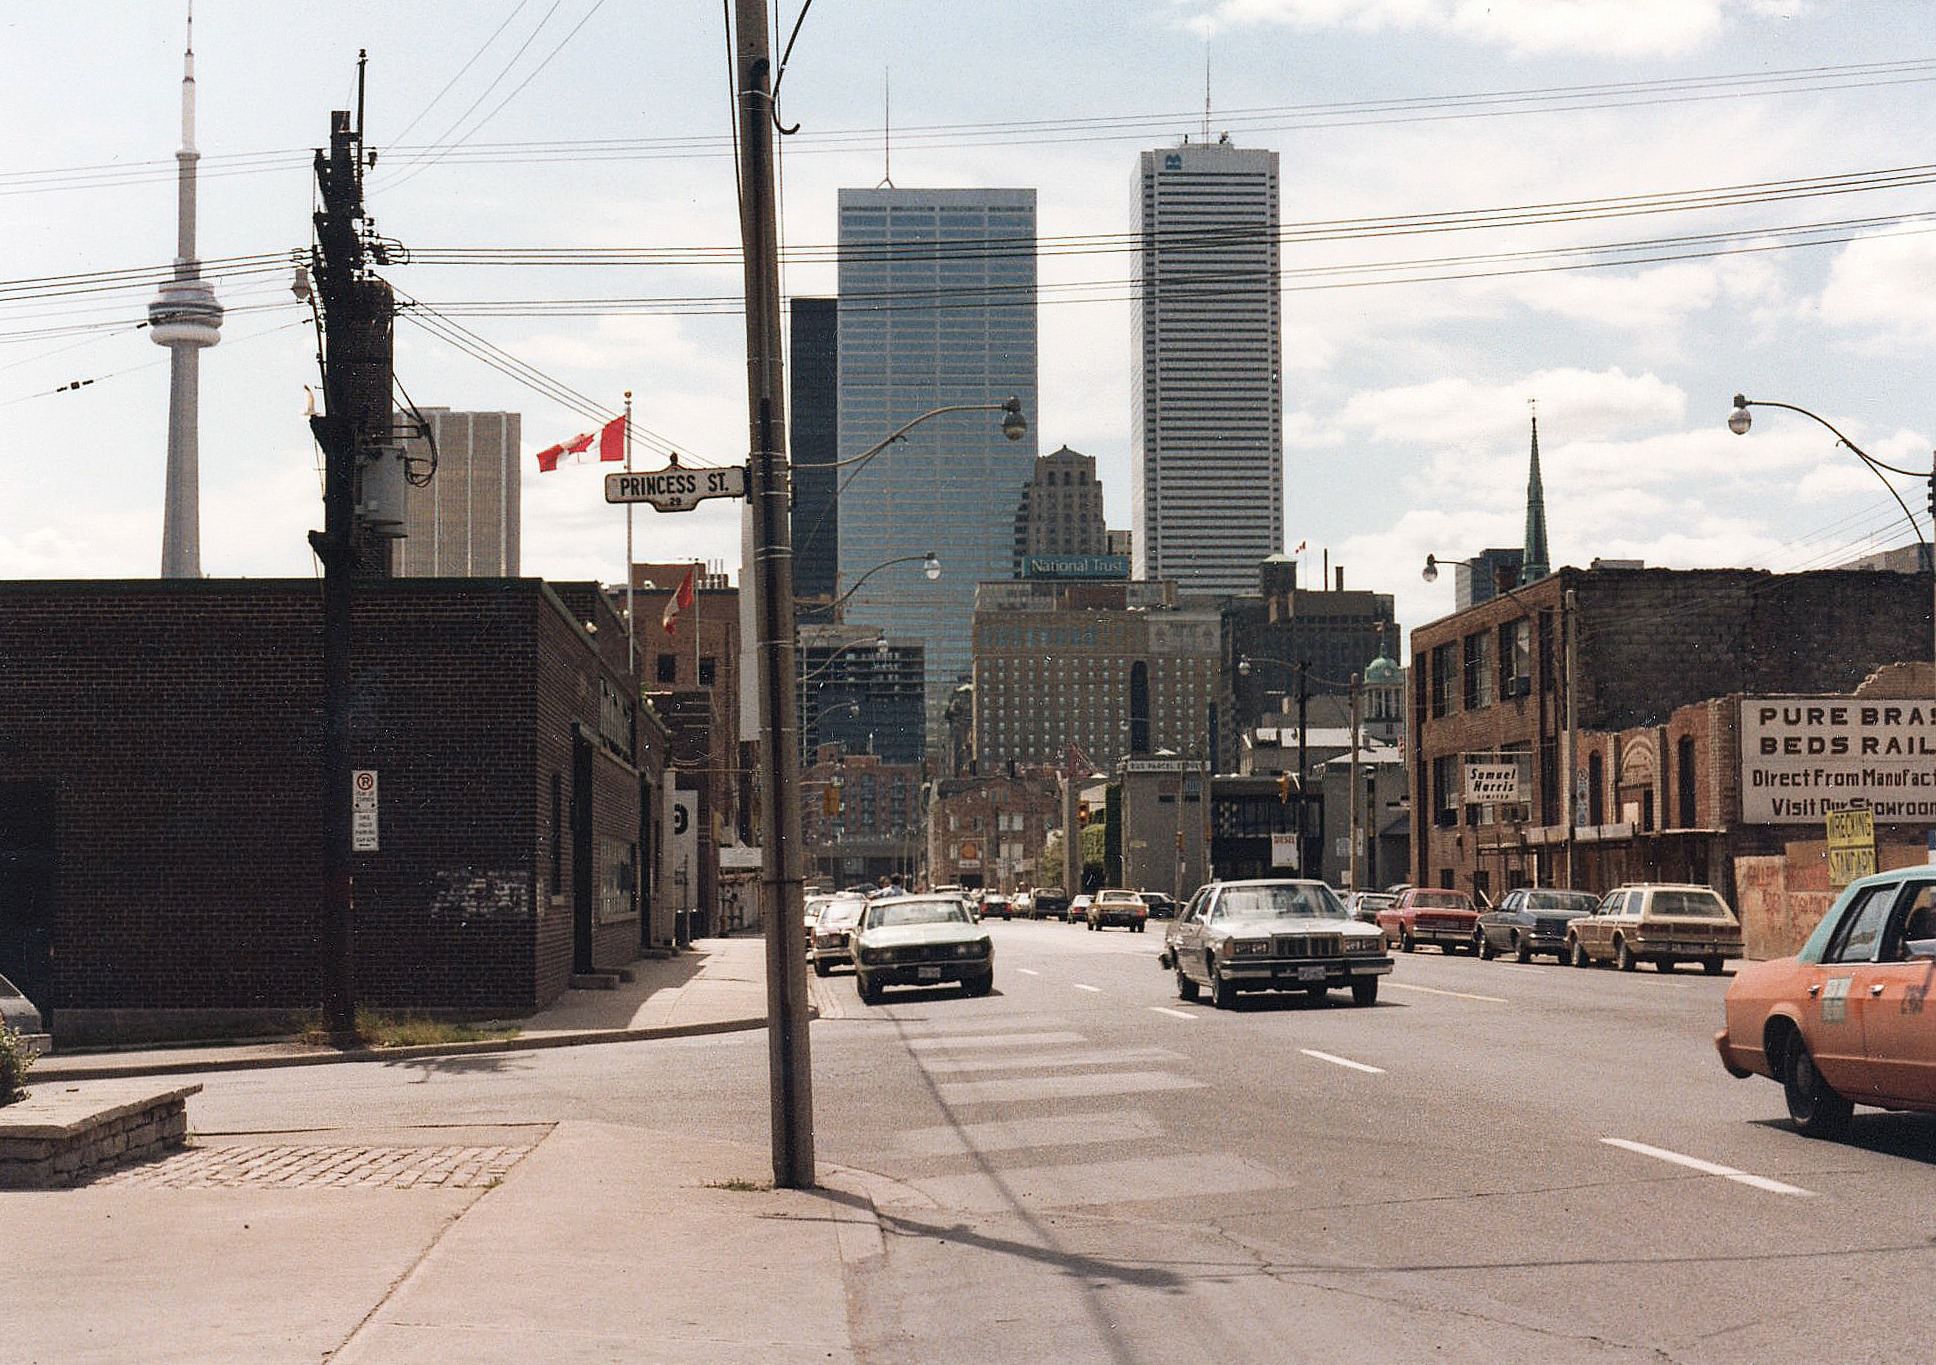 Looking west on Front Street from Princess Street, 1970s